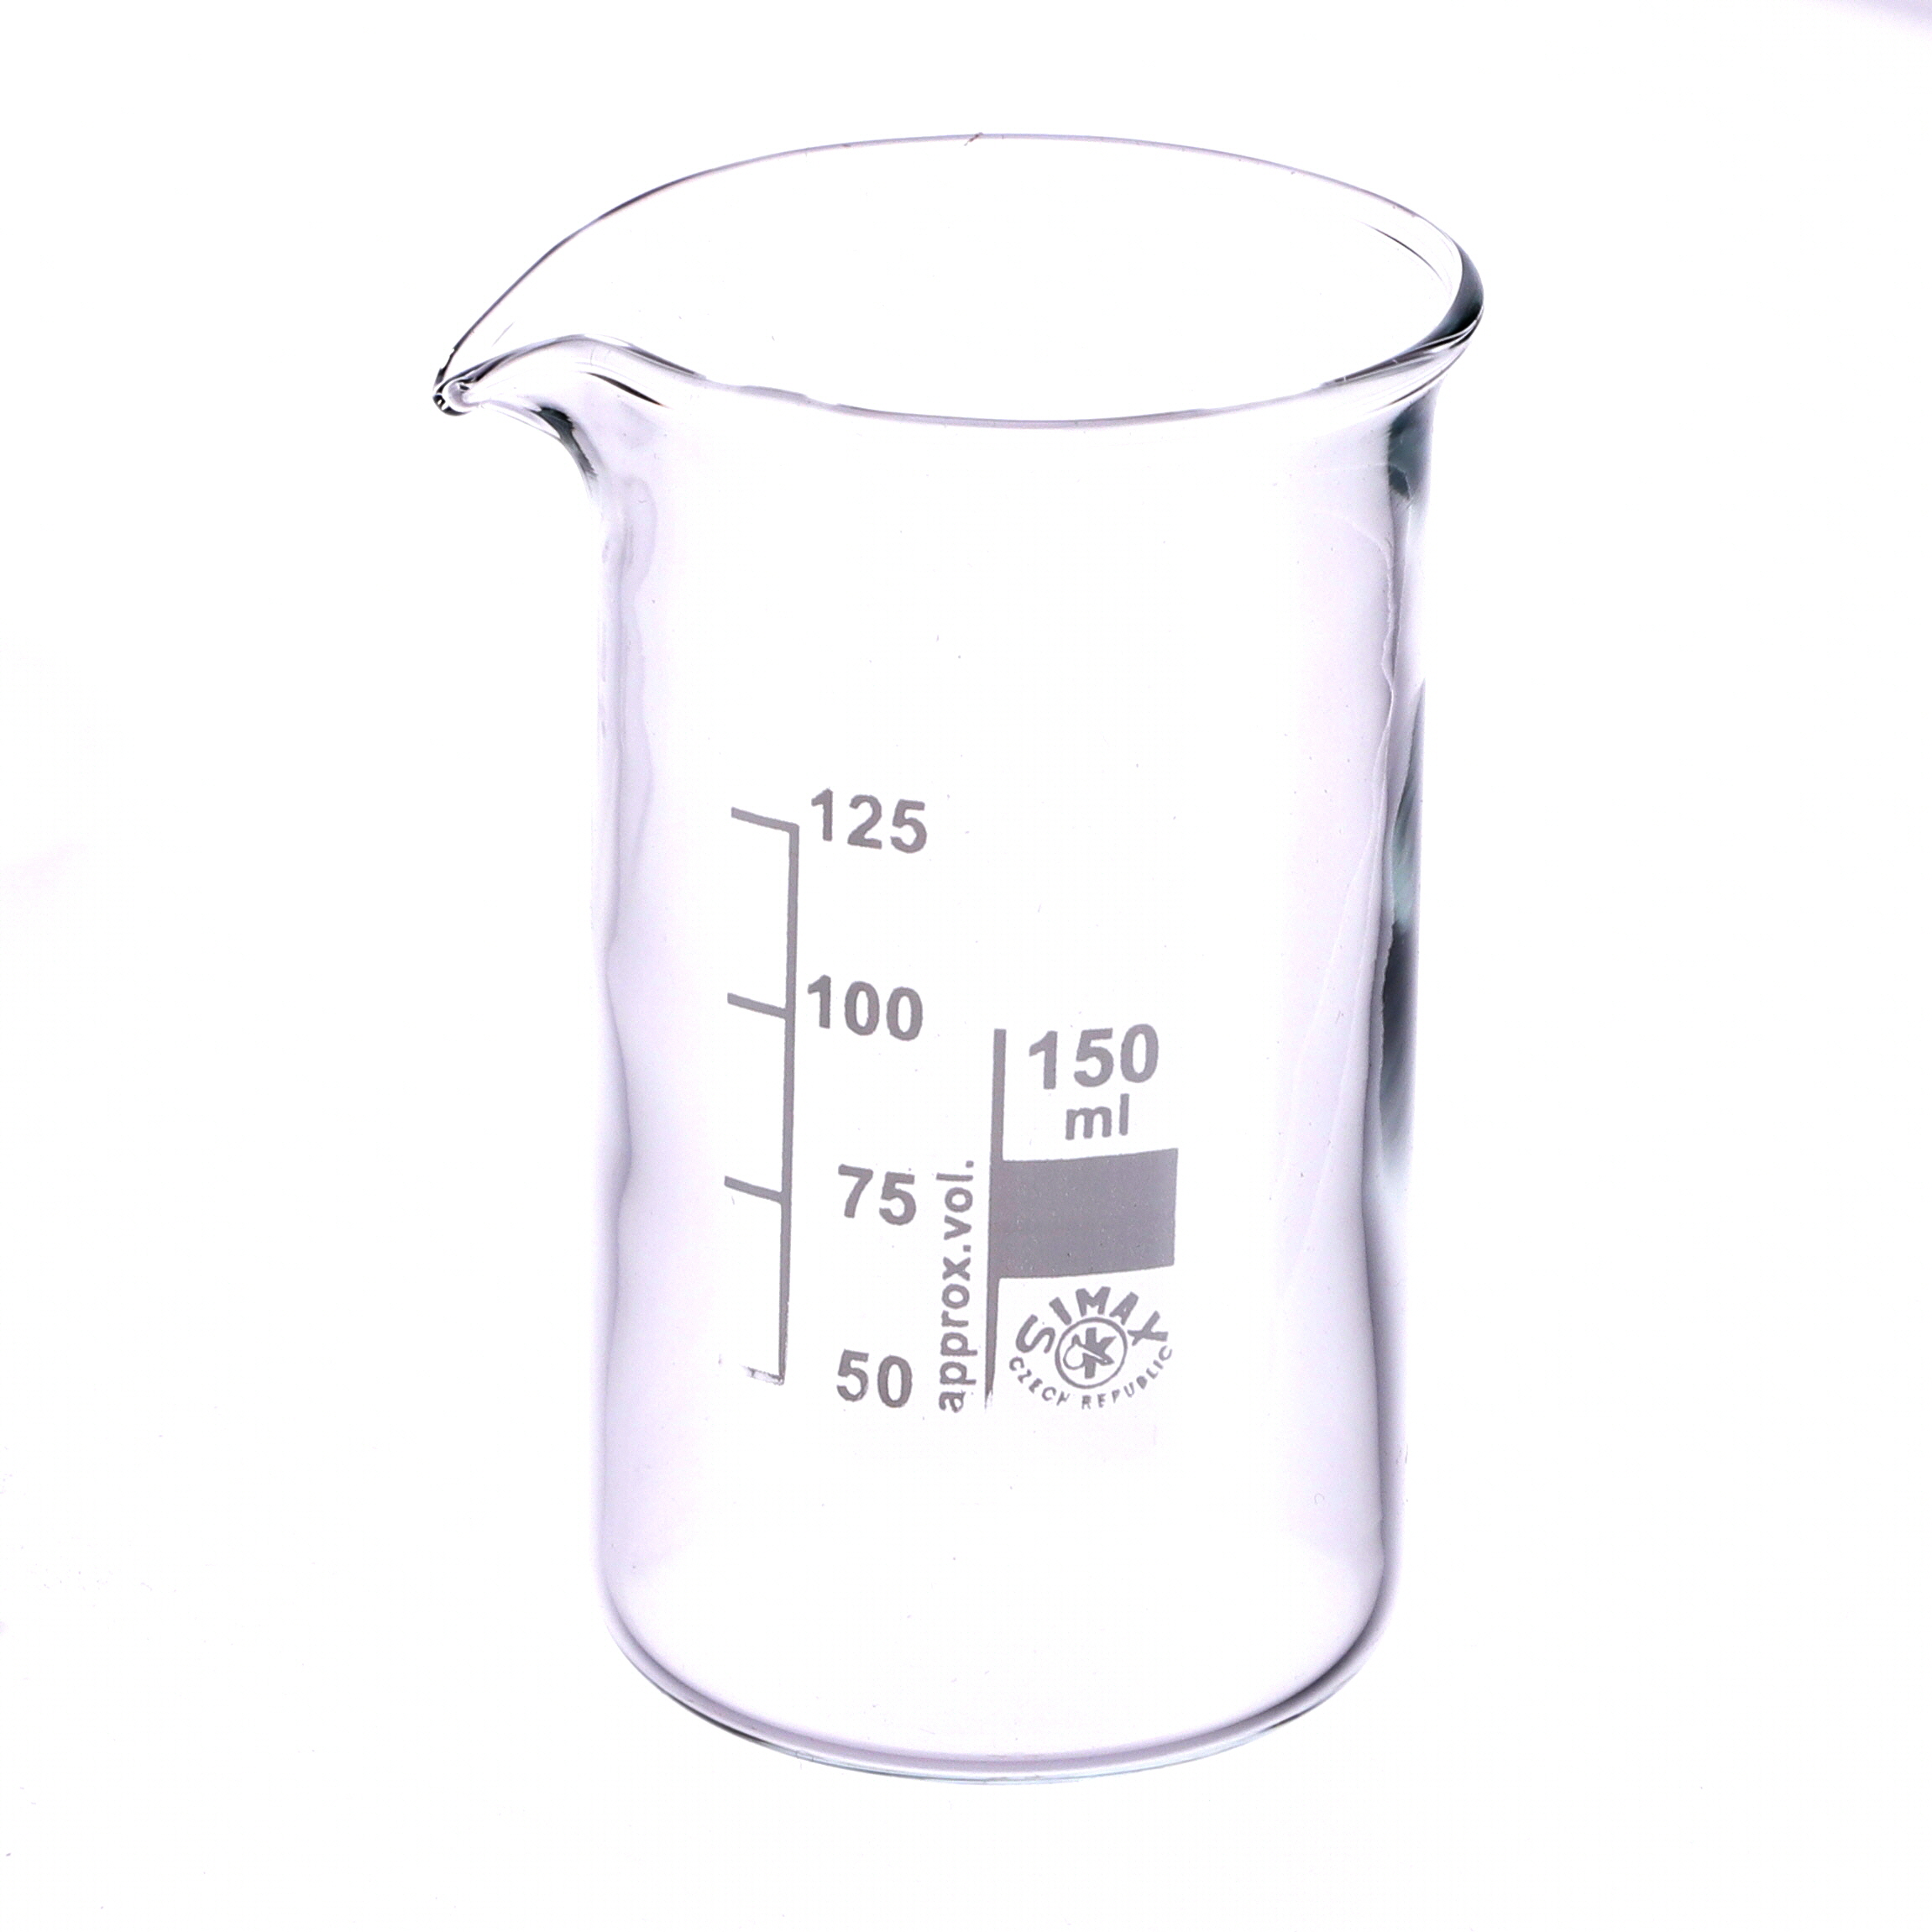 Simax Tall Form Beaker With Spout 150ml